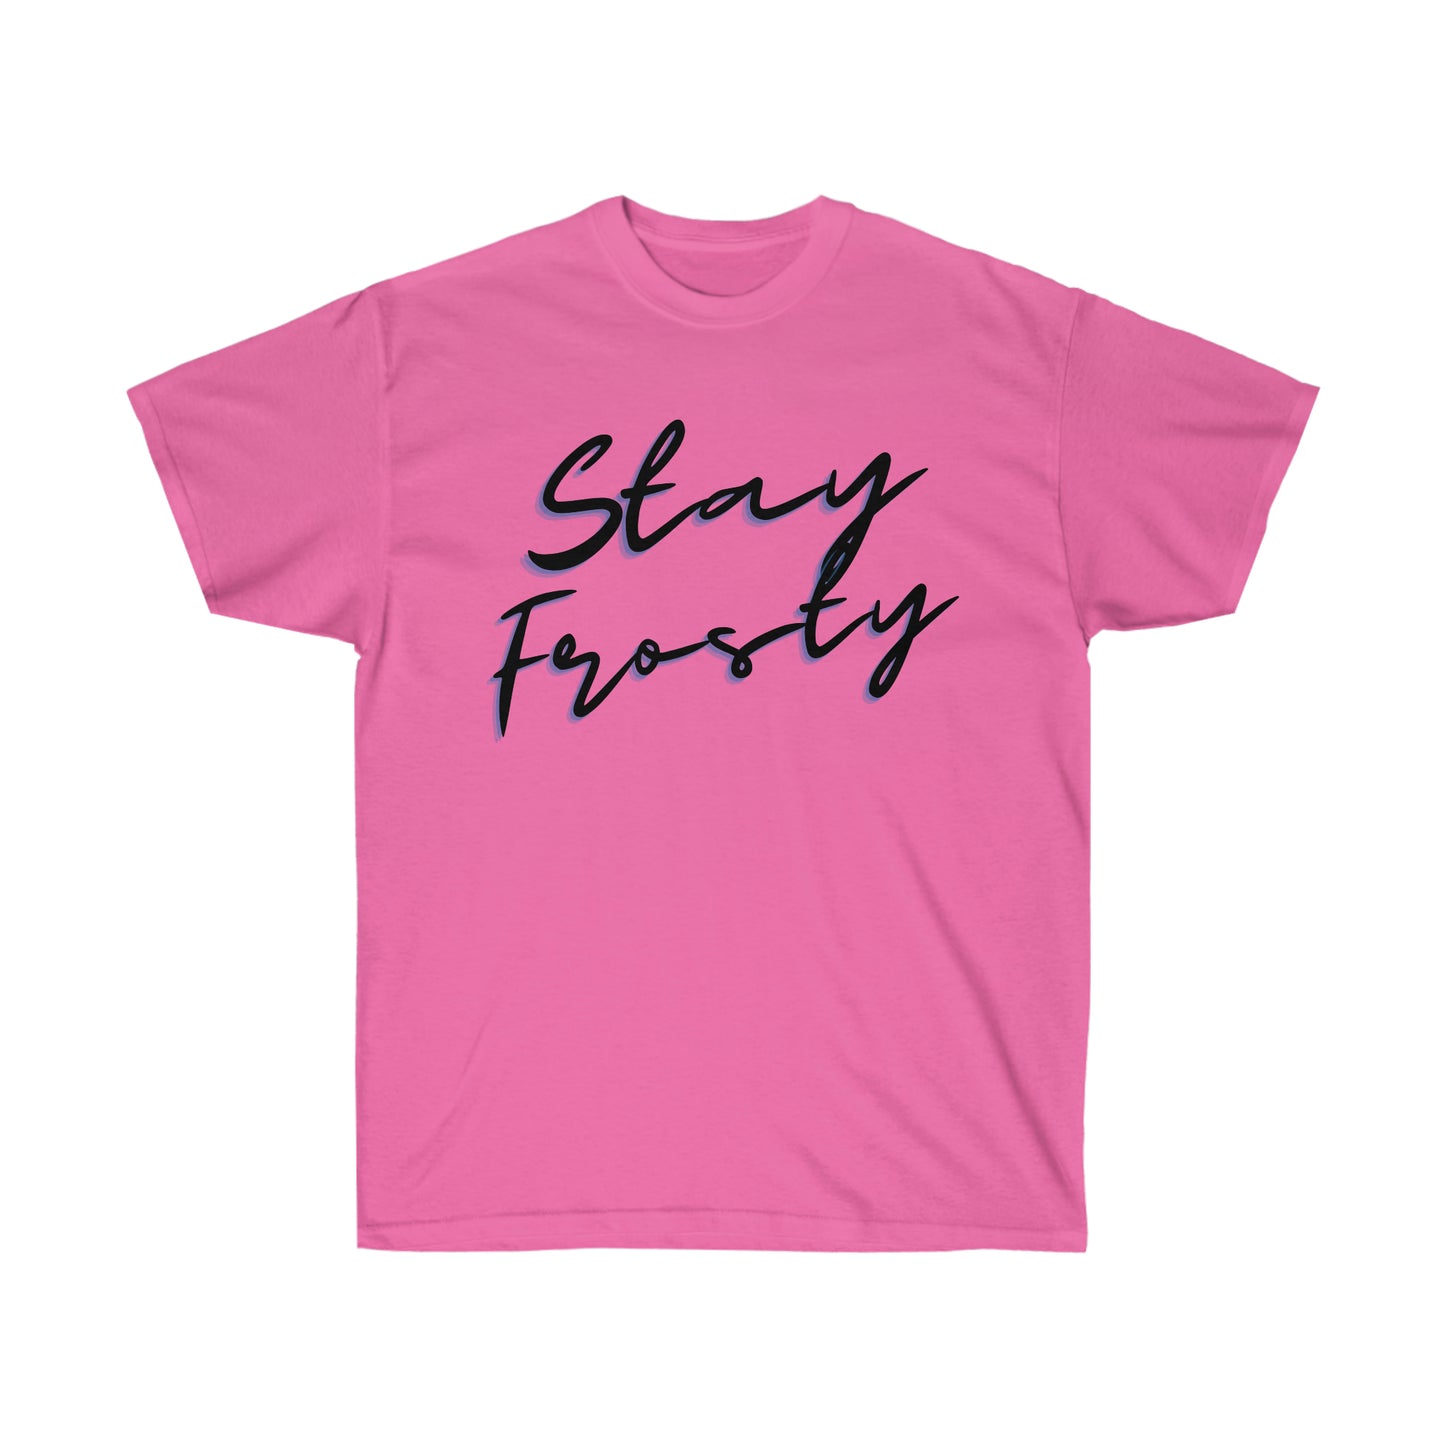 A Stay Frosty Weed T-Shirt that says stay frosty.